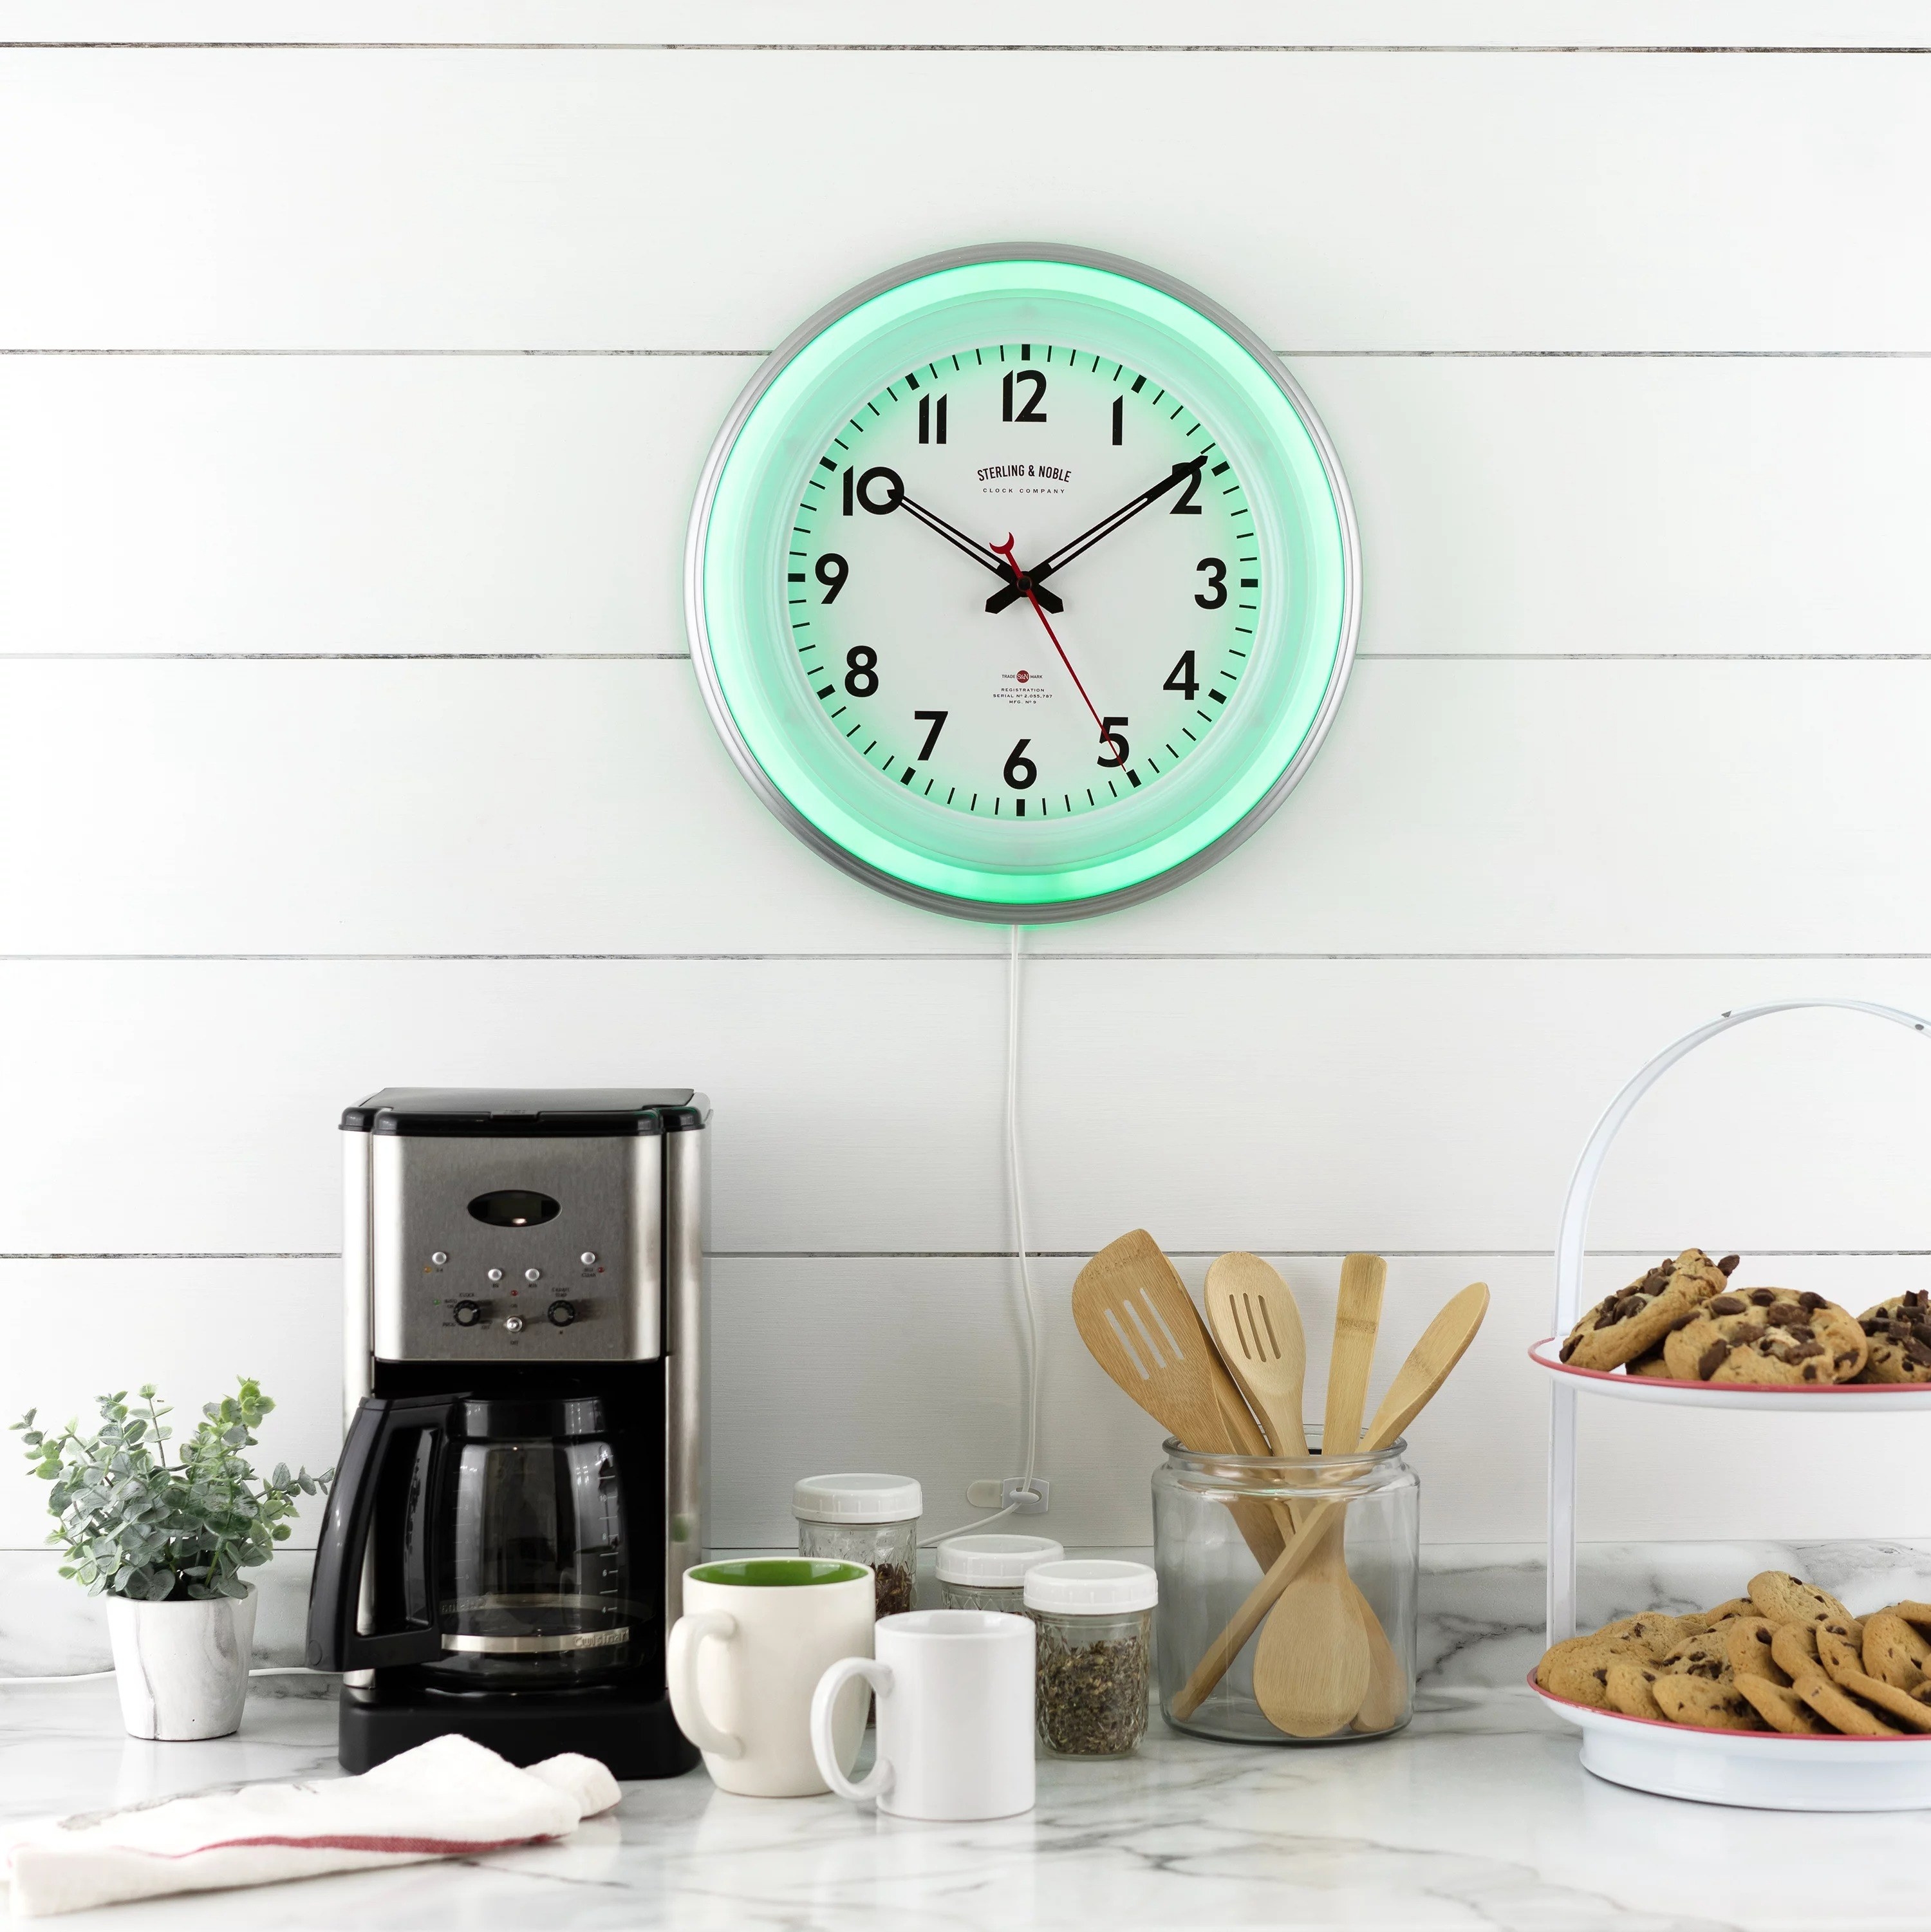 LED wall clock on kitchen wall, with green light on